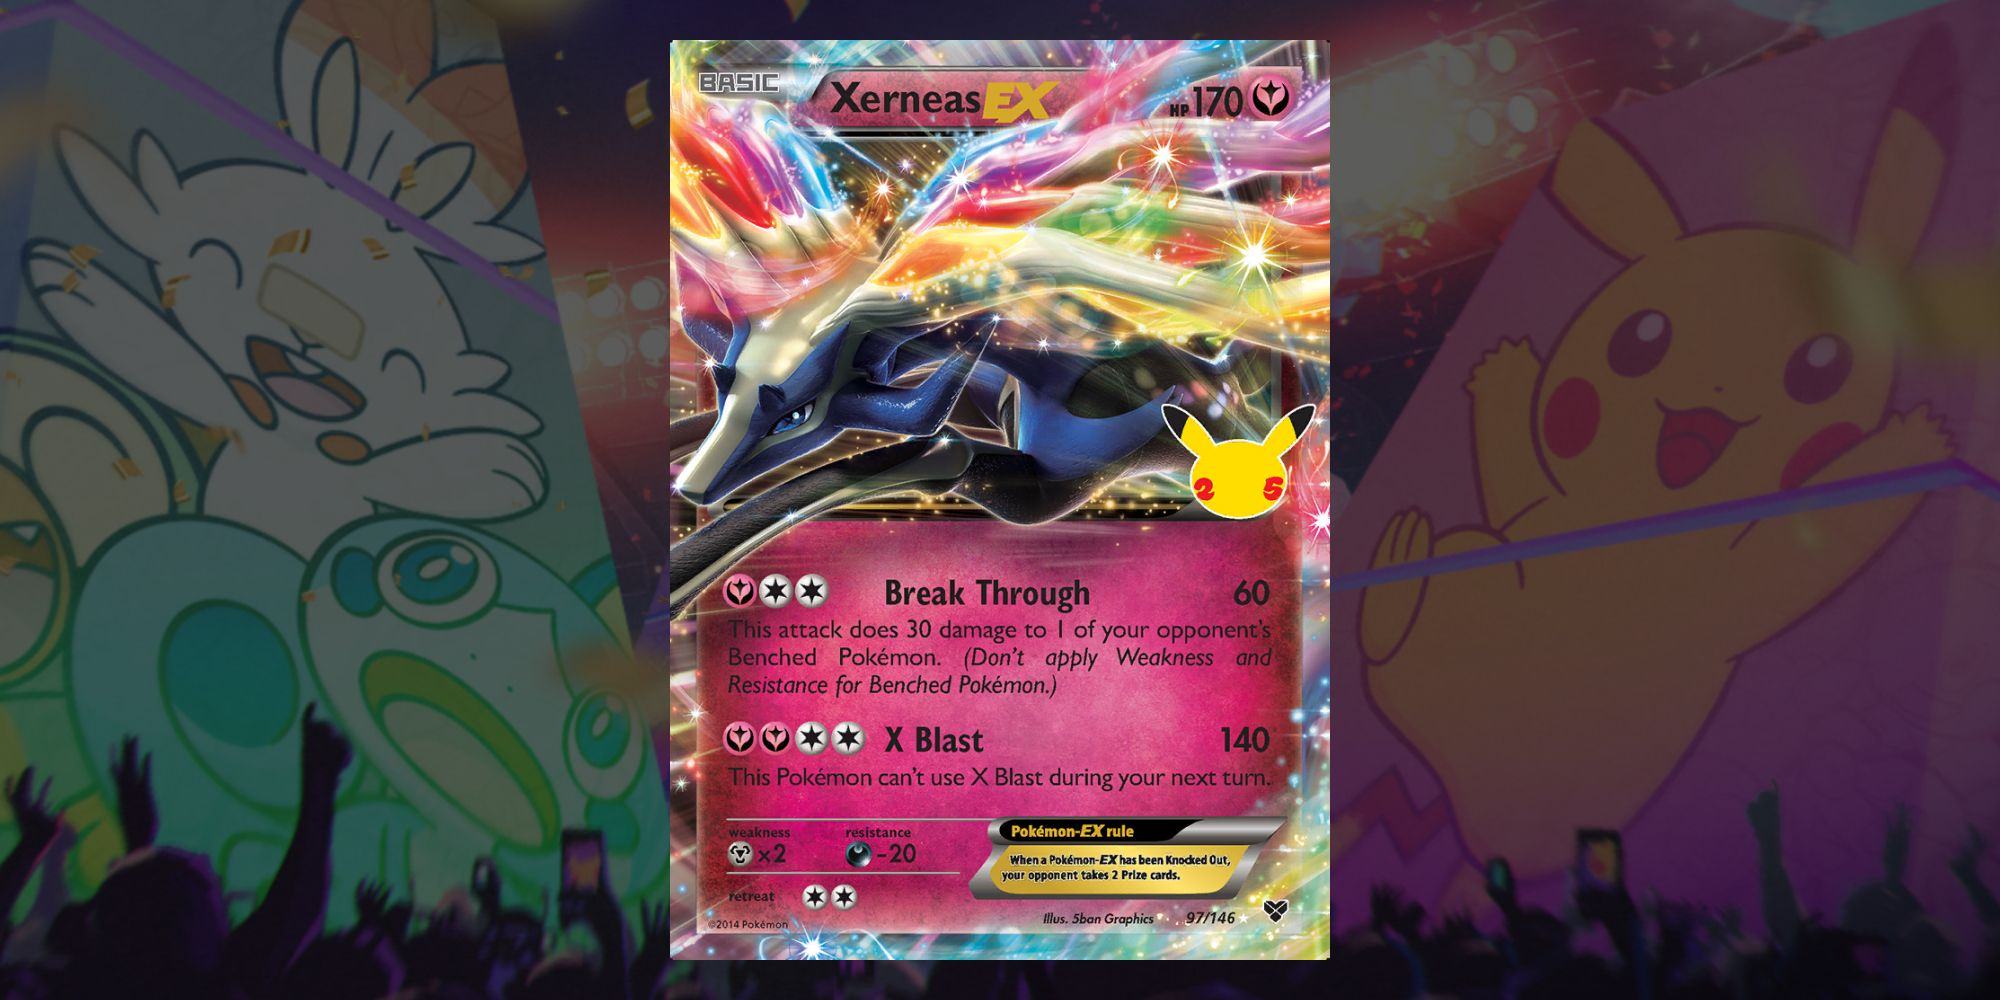 Image of Pokemon TCG Celebrations Xerneas Card in pink and rainbow.